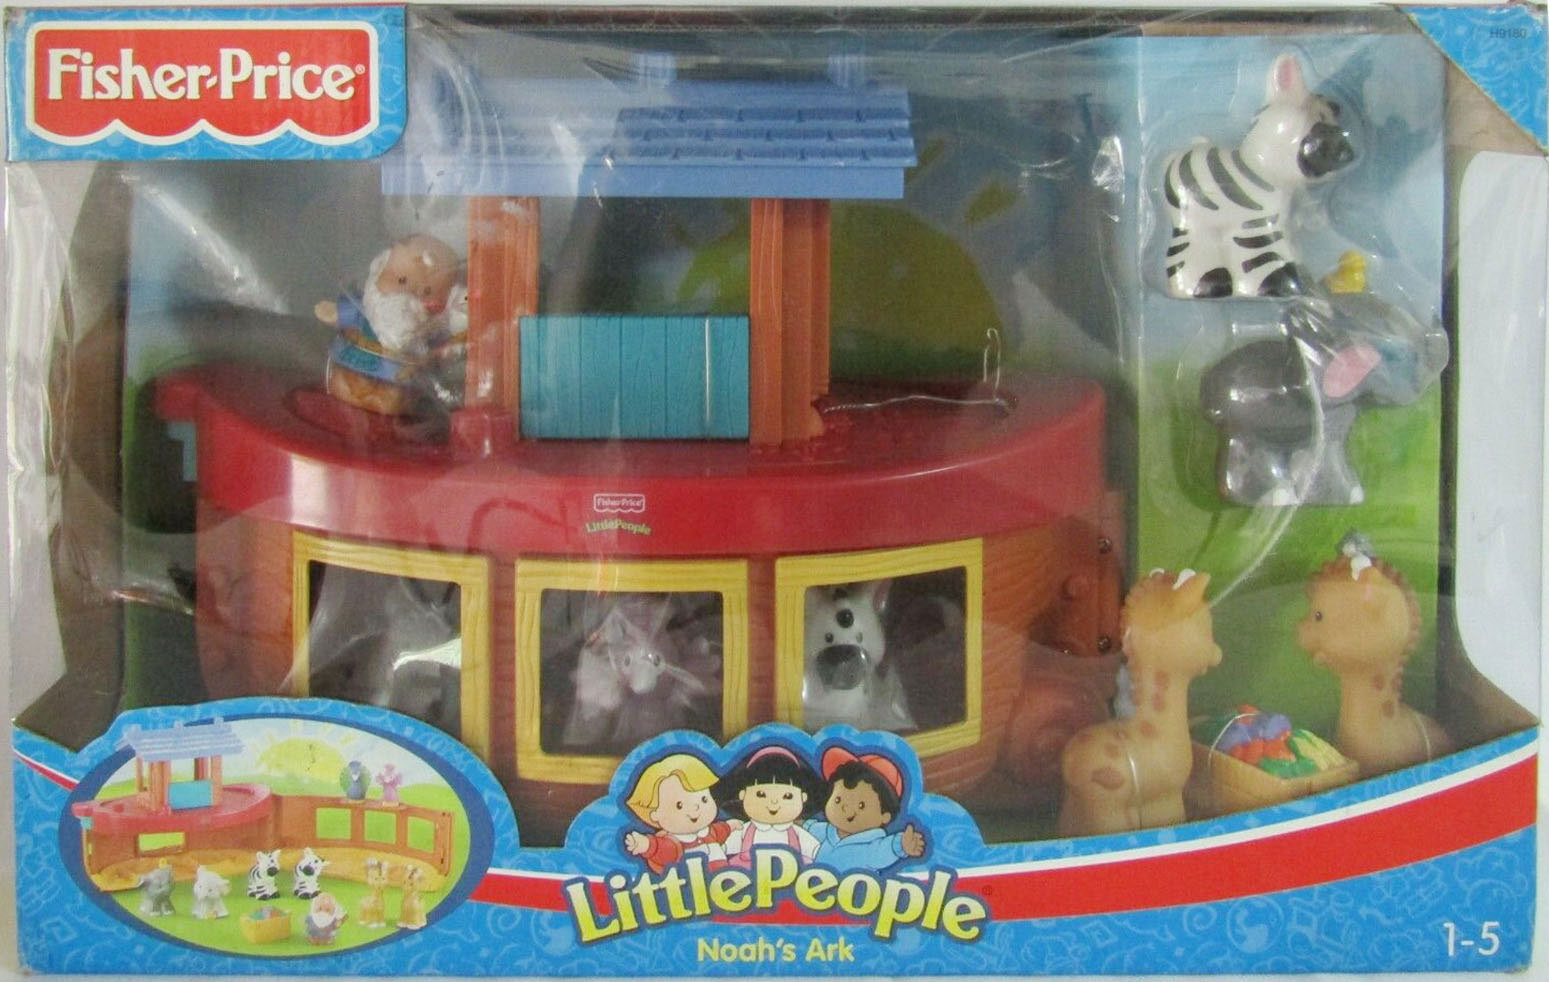 Fisher Price Mattel Toys Little People Lot of 4 Figures 2001 2005 2007